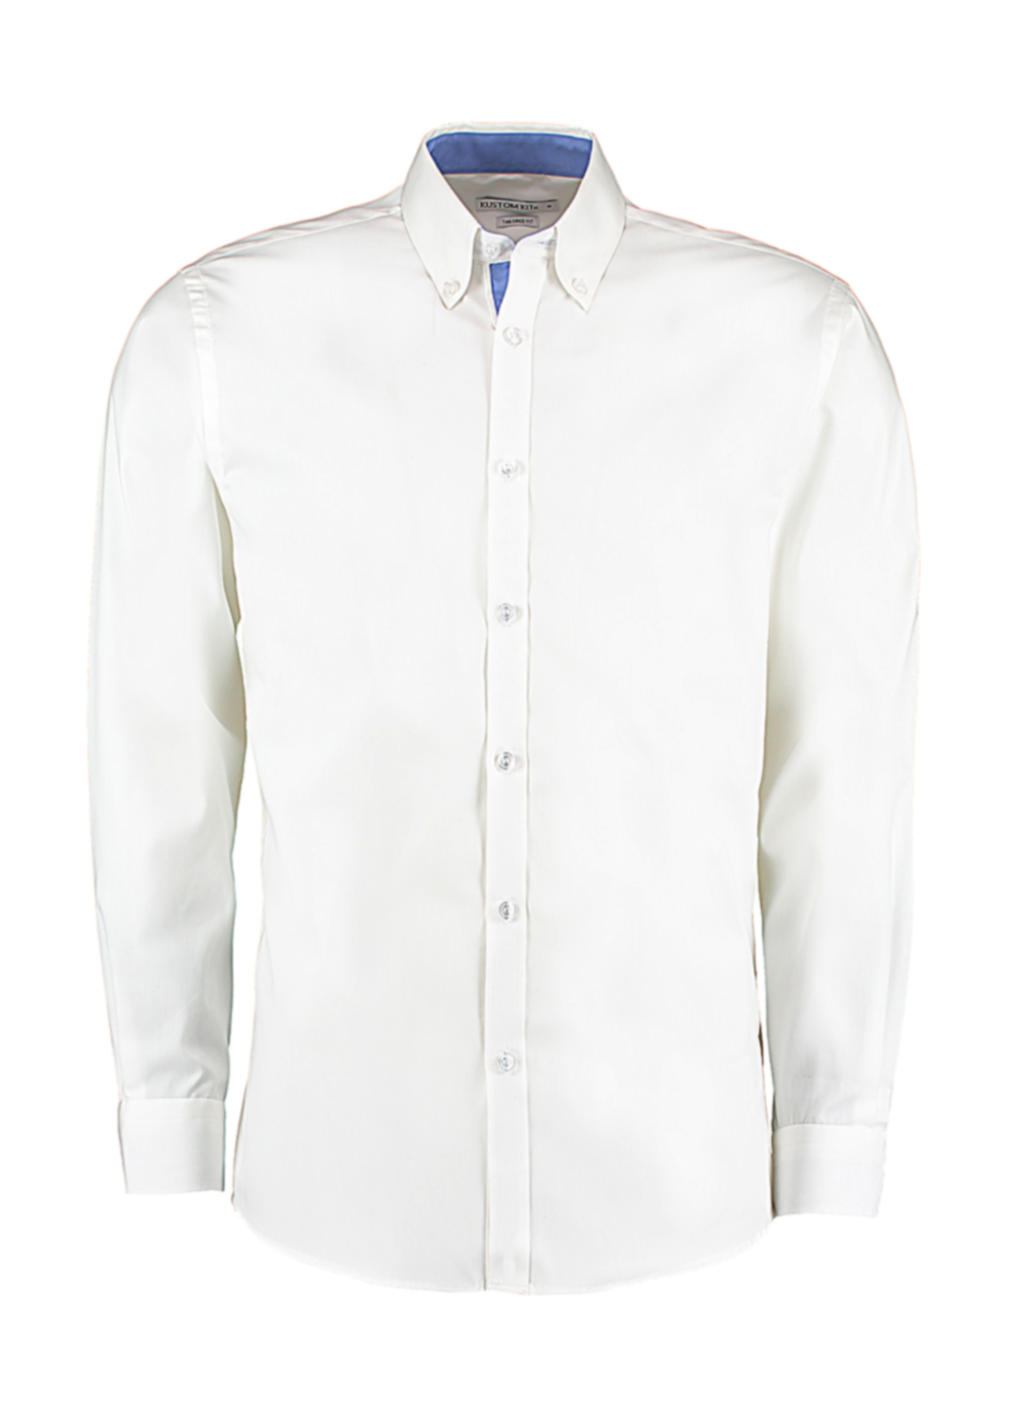  Tailored Fit Premium Contrast Oxford Shirt in Farbe White/Mid Blue